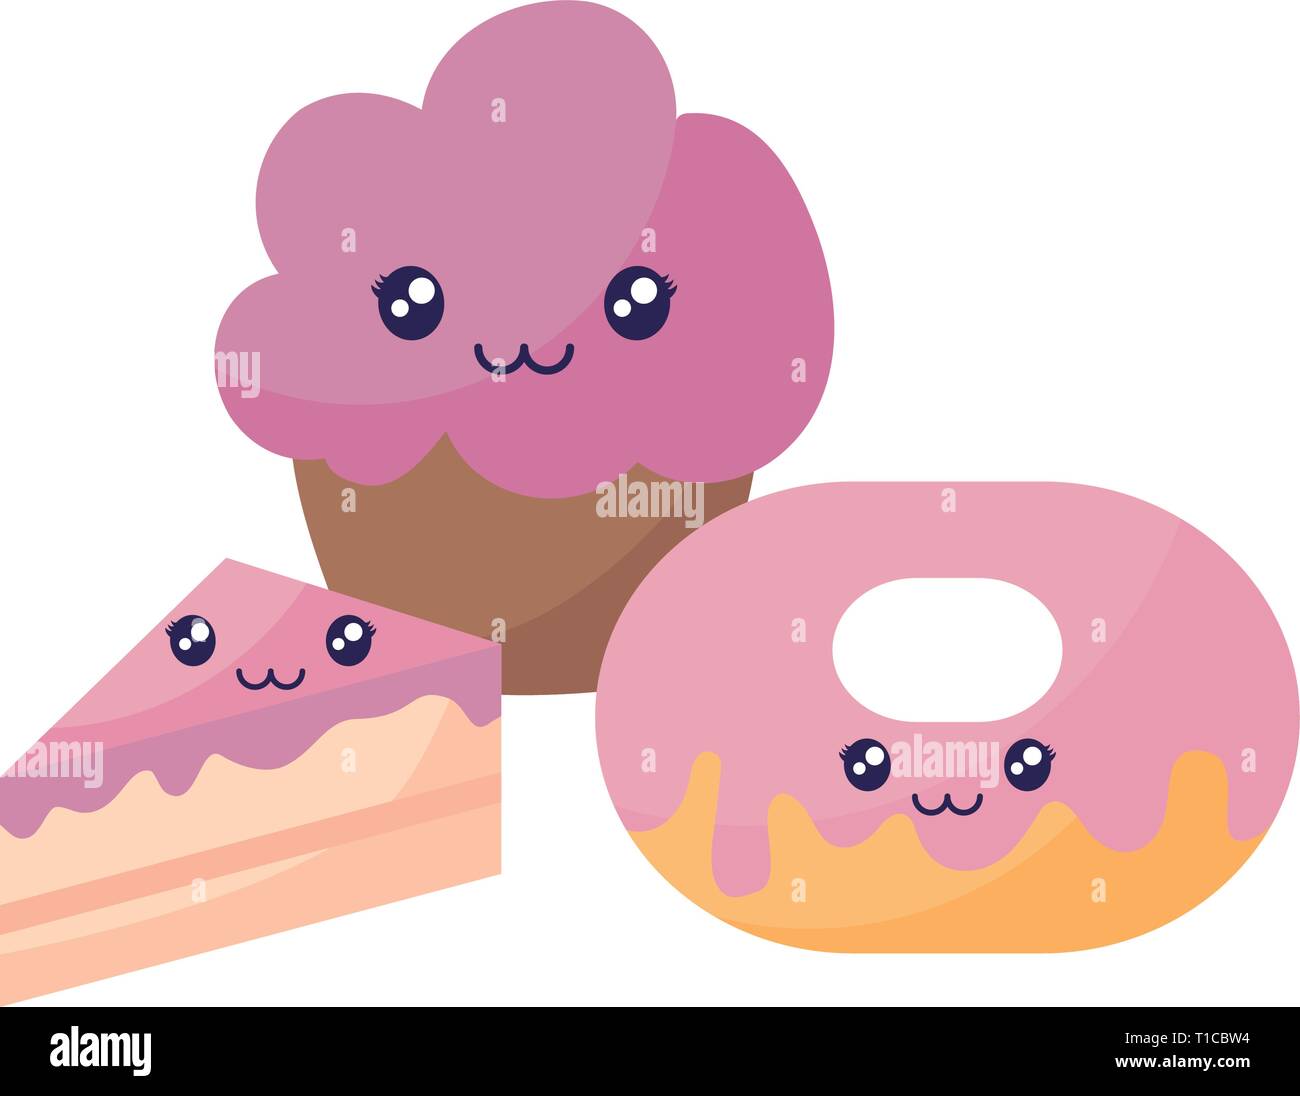 Kawaii Sweets Clipart Cute Sweet Candy Clipart Food Cake Donut